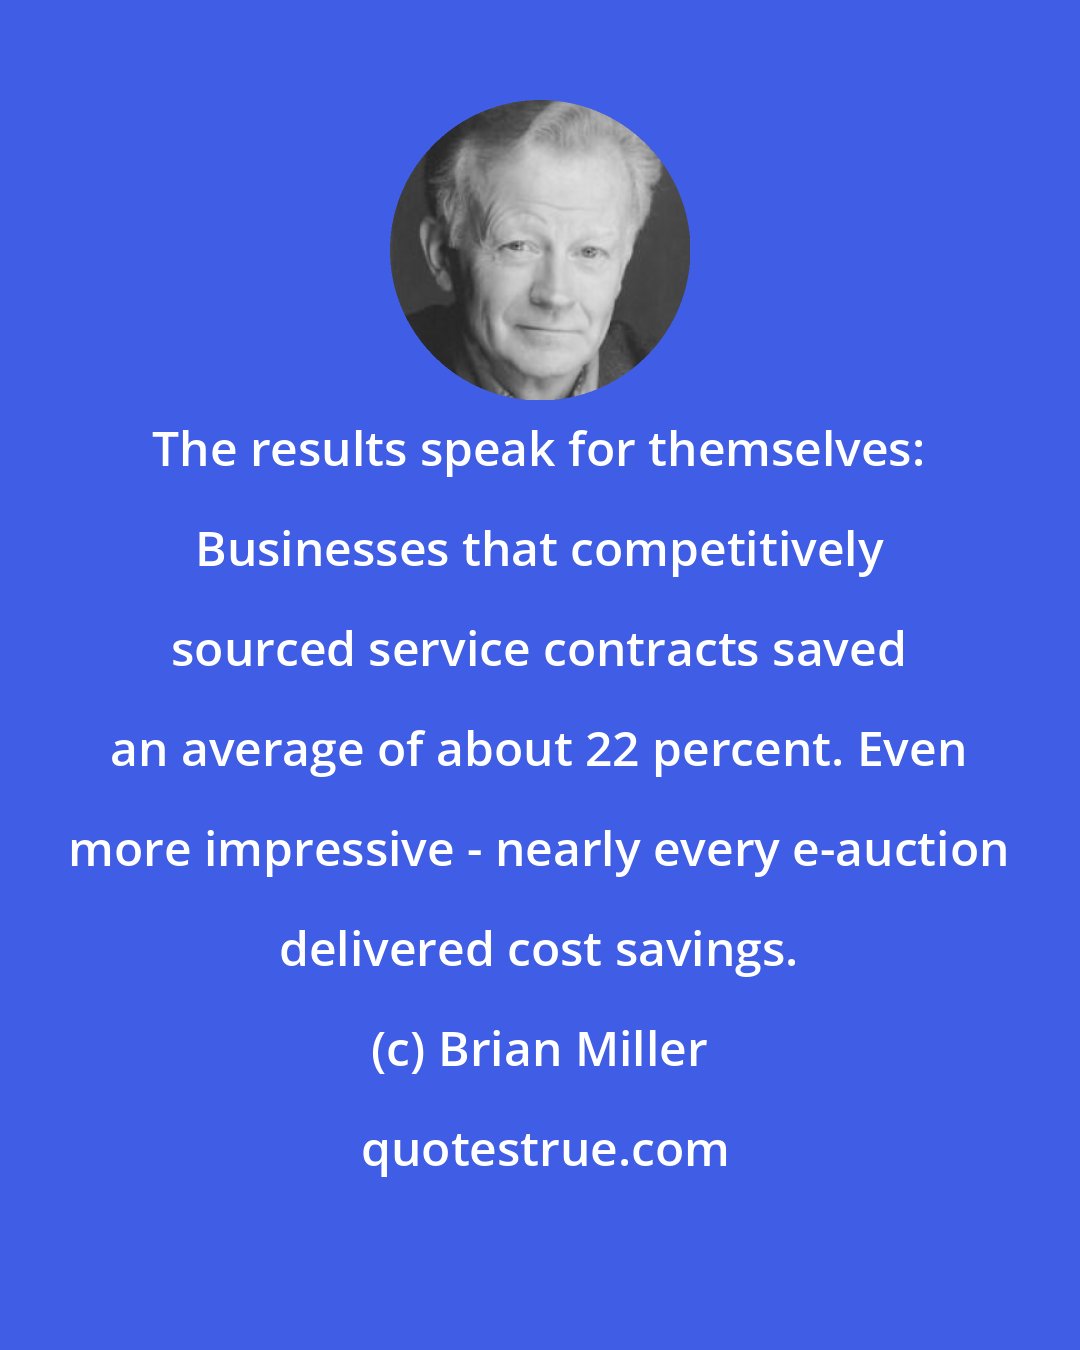 Brian Miller: The results speak for themselves: Businesses that competitively sourced service contracts saved an average of about 22 percent. Even more impressive - nearly every e-auction delivered cost savings.